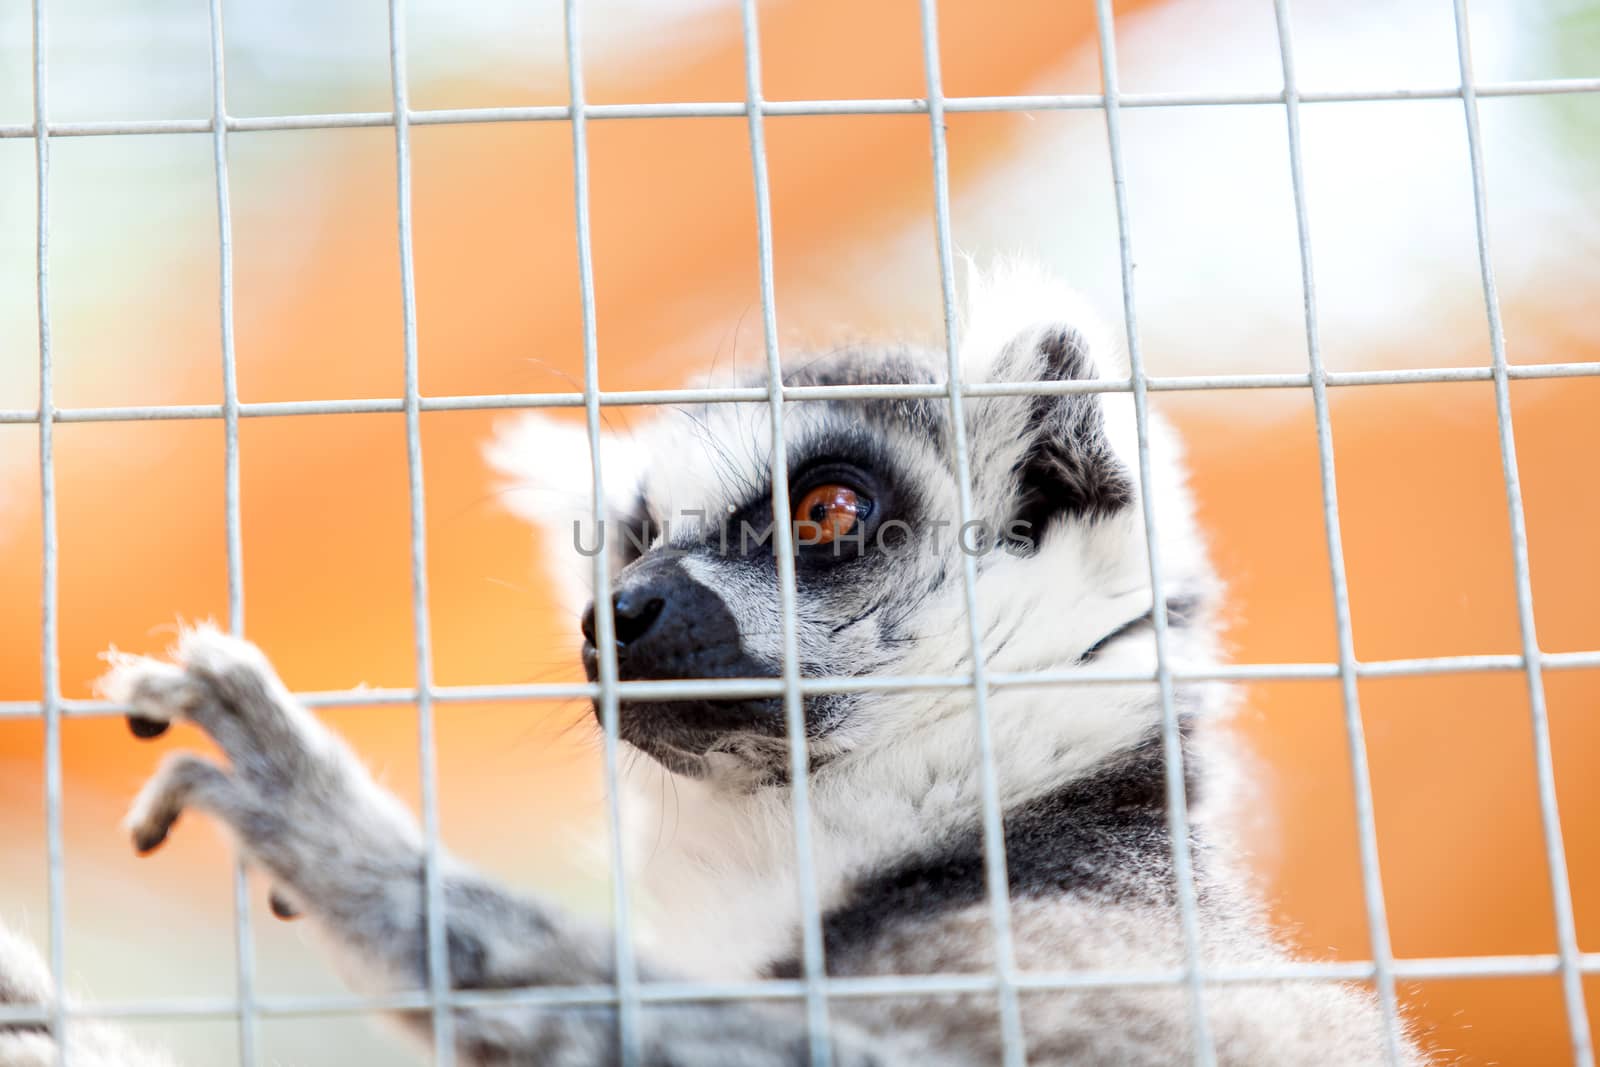 Portrait of a lemur behind bars, locked up a day